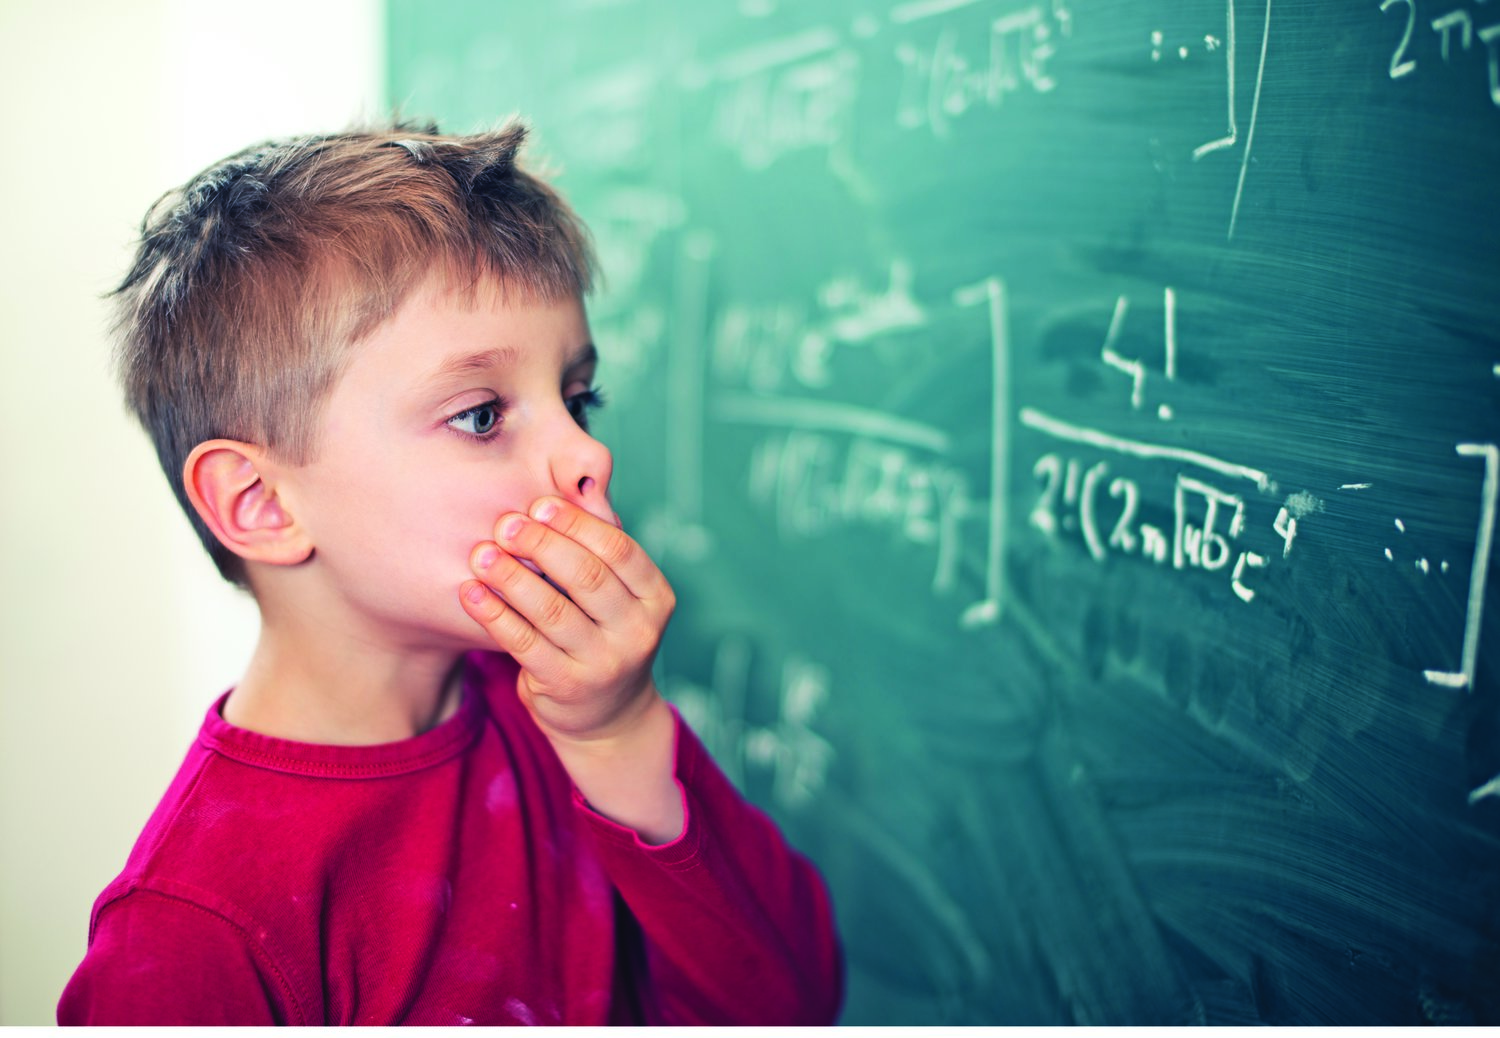 Little boy aged 5 in math class overwhelmed by the math formula.